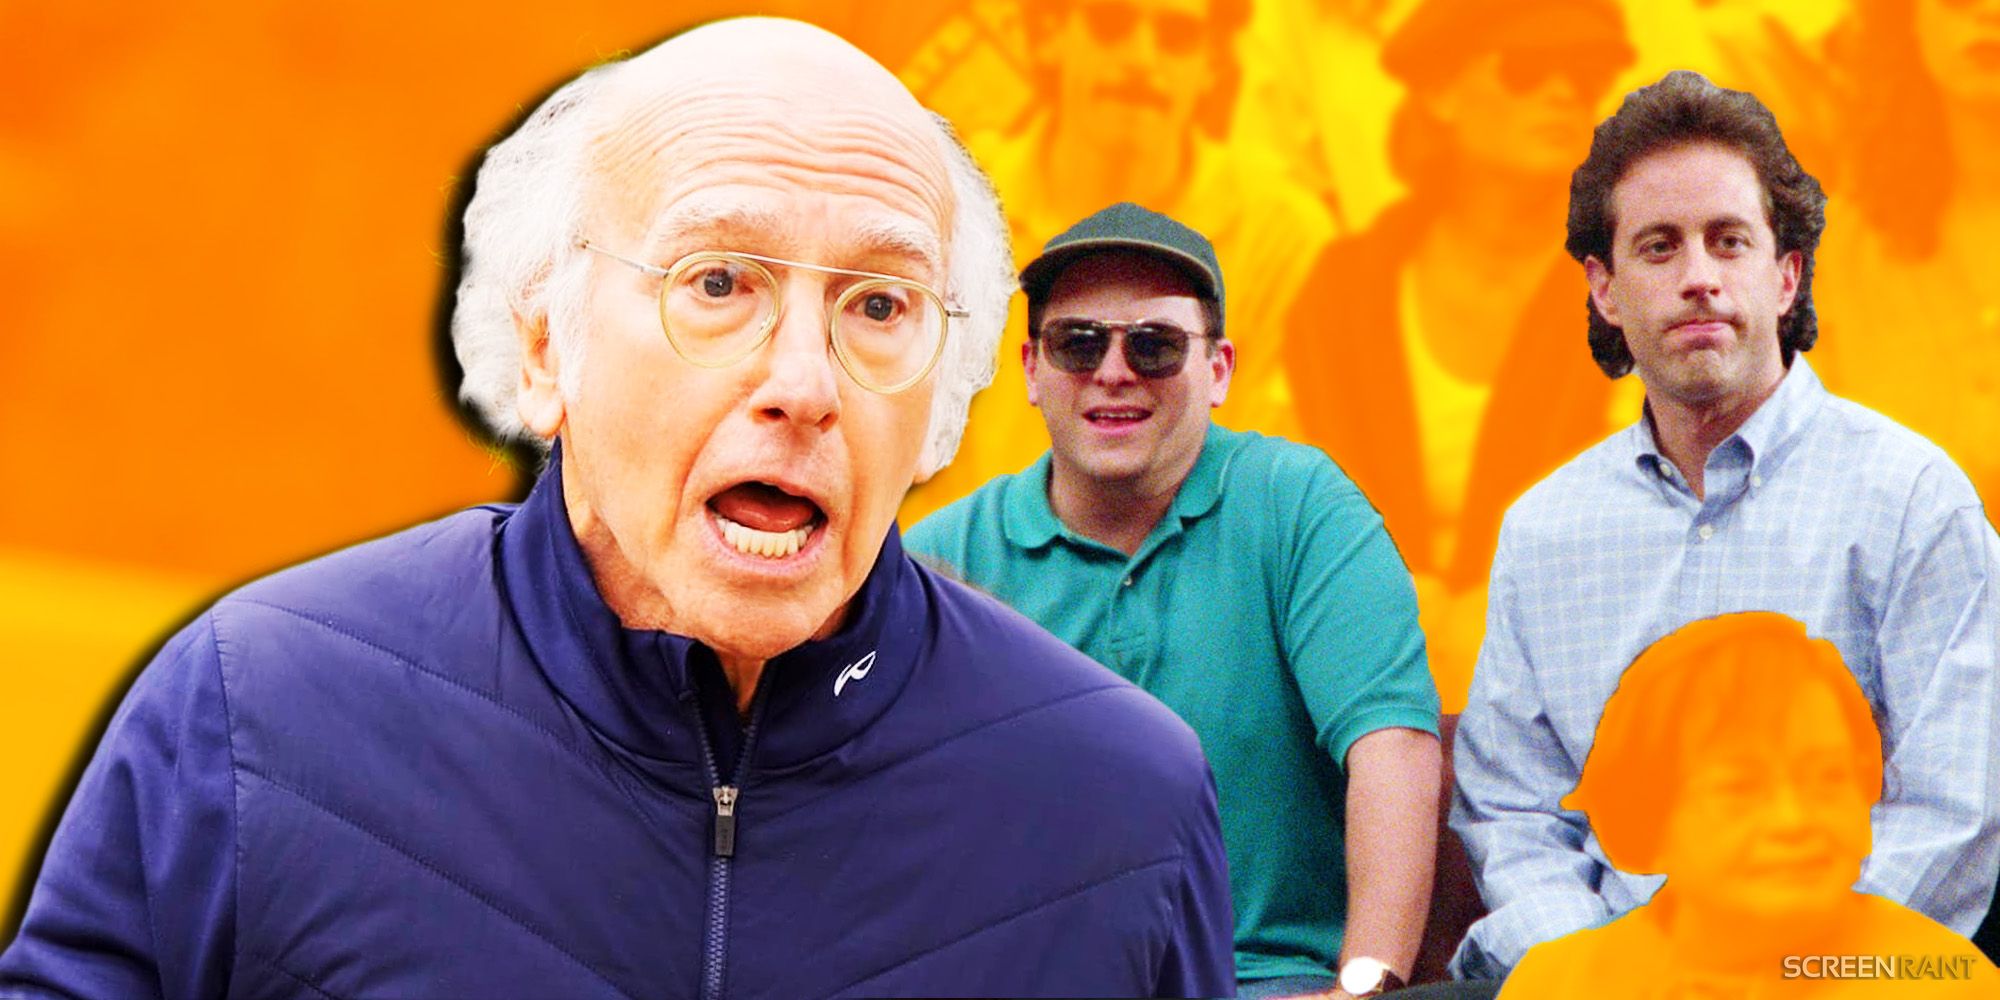 Larry David in Curb season 12 episode 3 as well as Jerry & George in Seinfeld's %22The Lip Reader%22